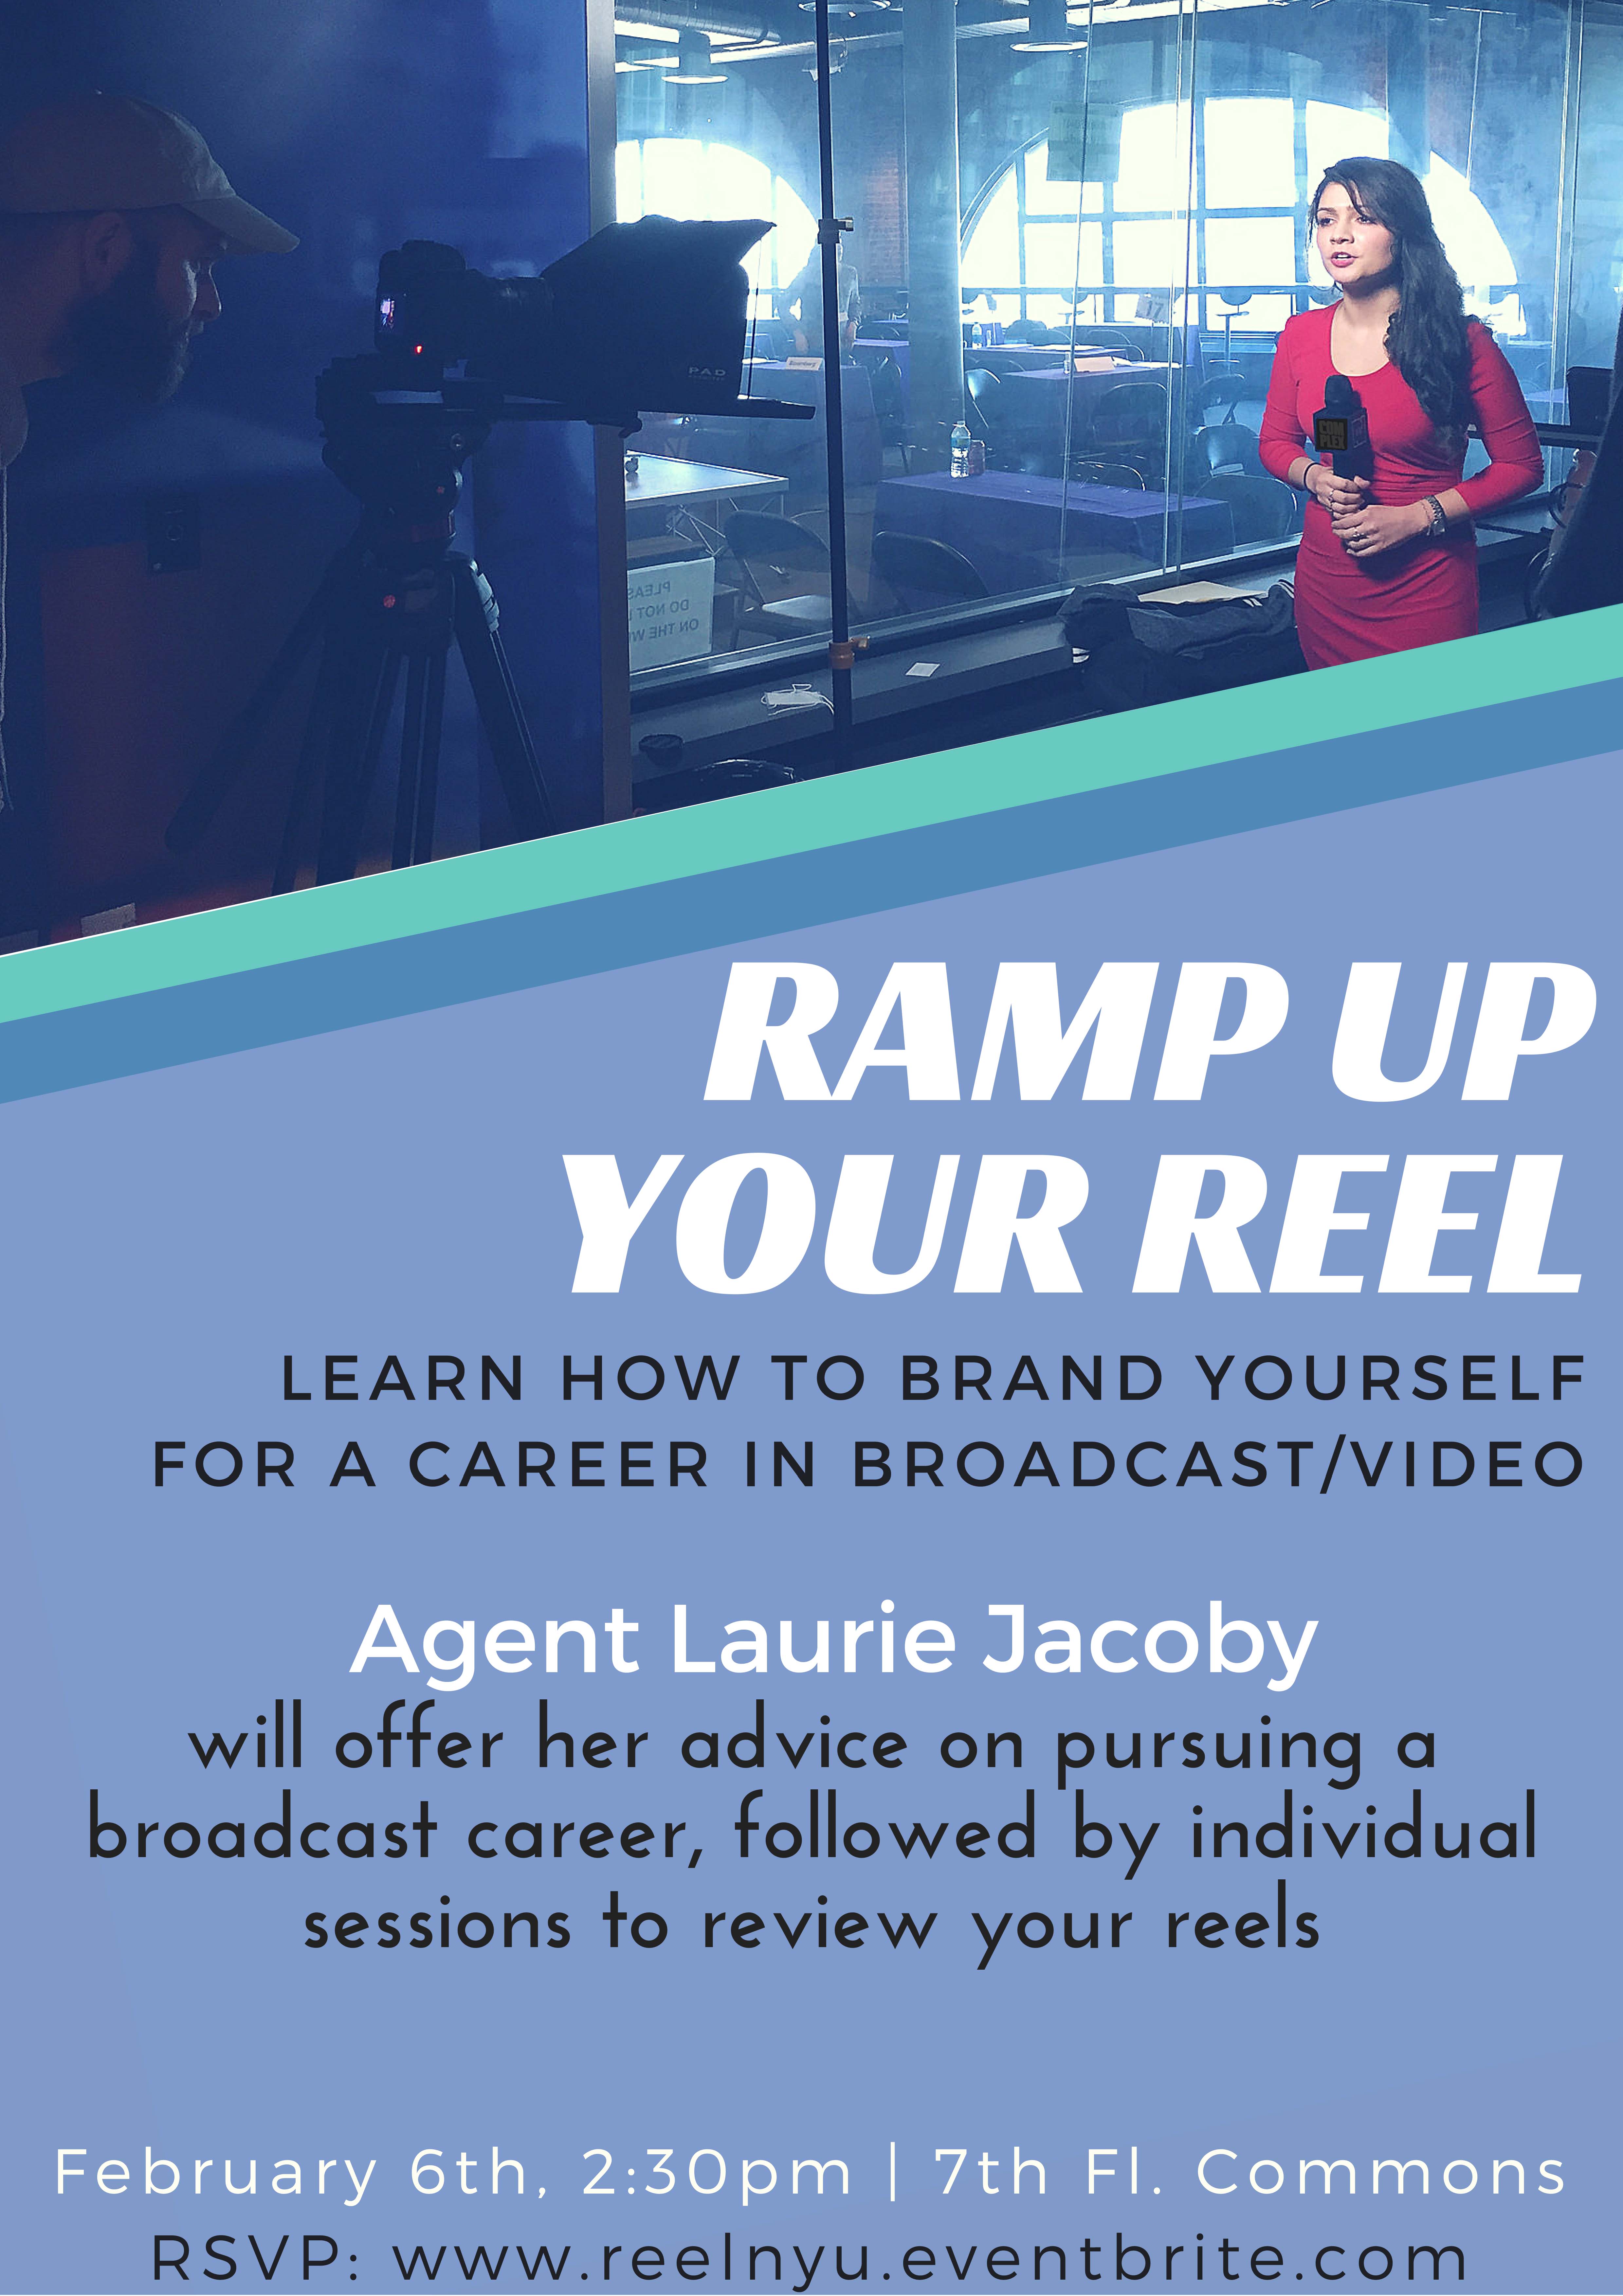 Ramp Up Your Reel - Event Poster 6 Feb 2017